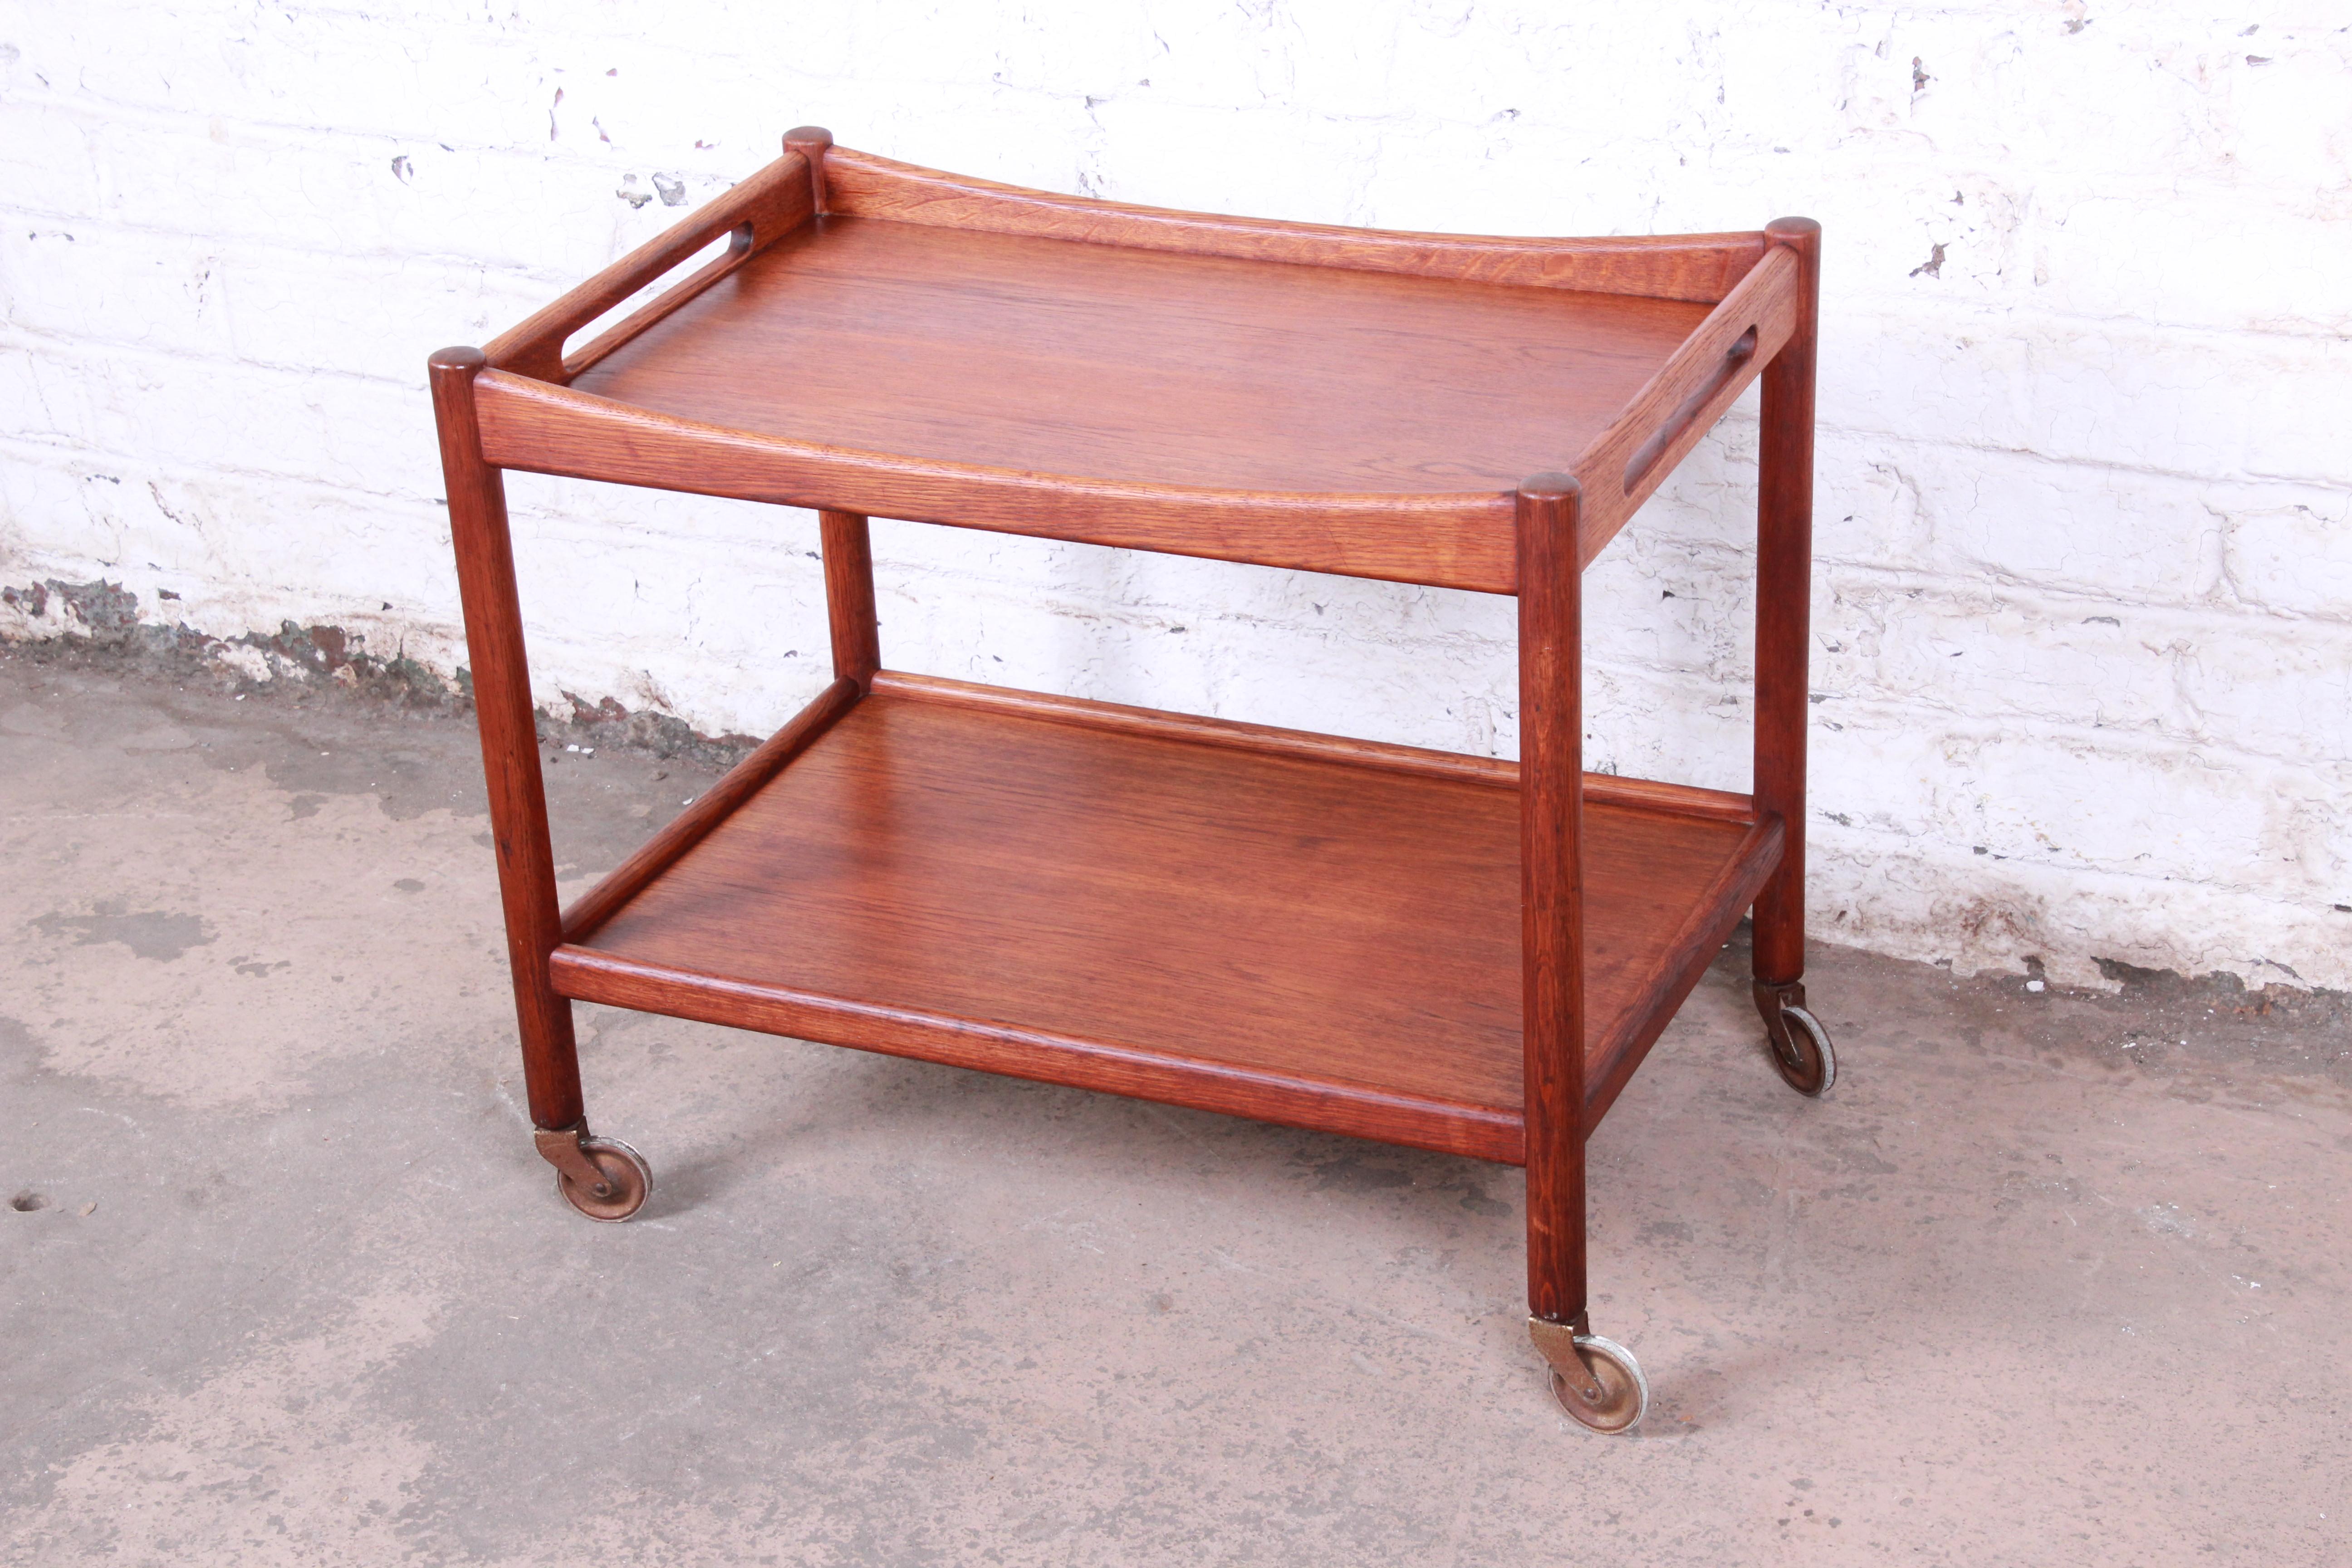 A rare midcentury Danish modern teak bar cart or serving trolley designed by Hans Wegner for Andreas Tuck. The cart features gorgeous teak wood grain and Minimalist Danish design. It sits on original casters for easy mobility. The original branded